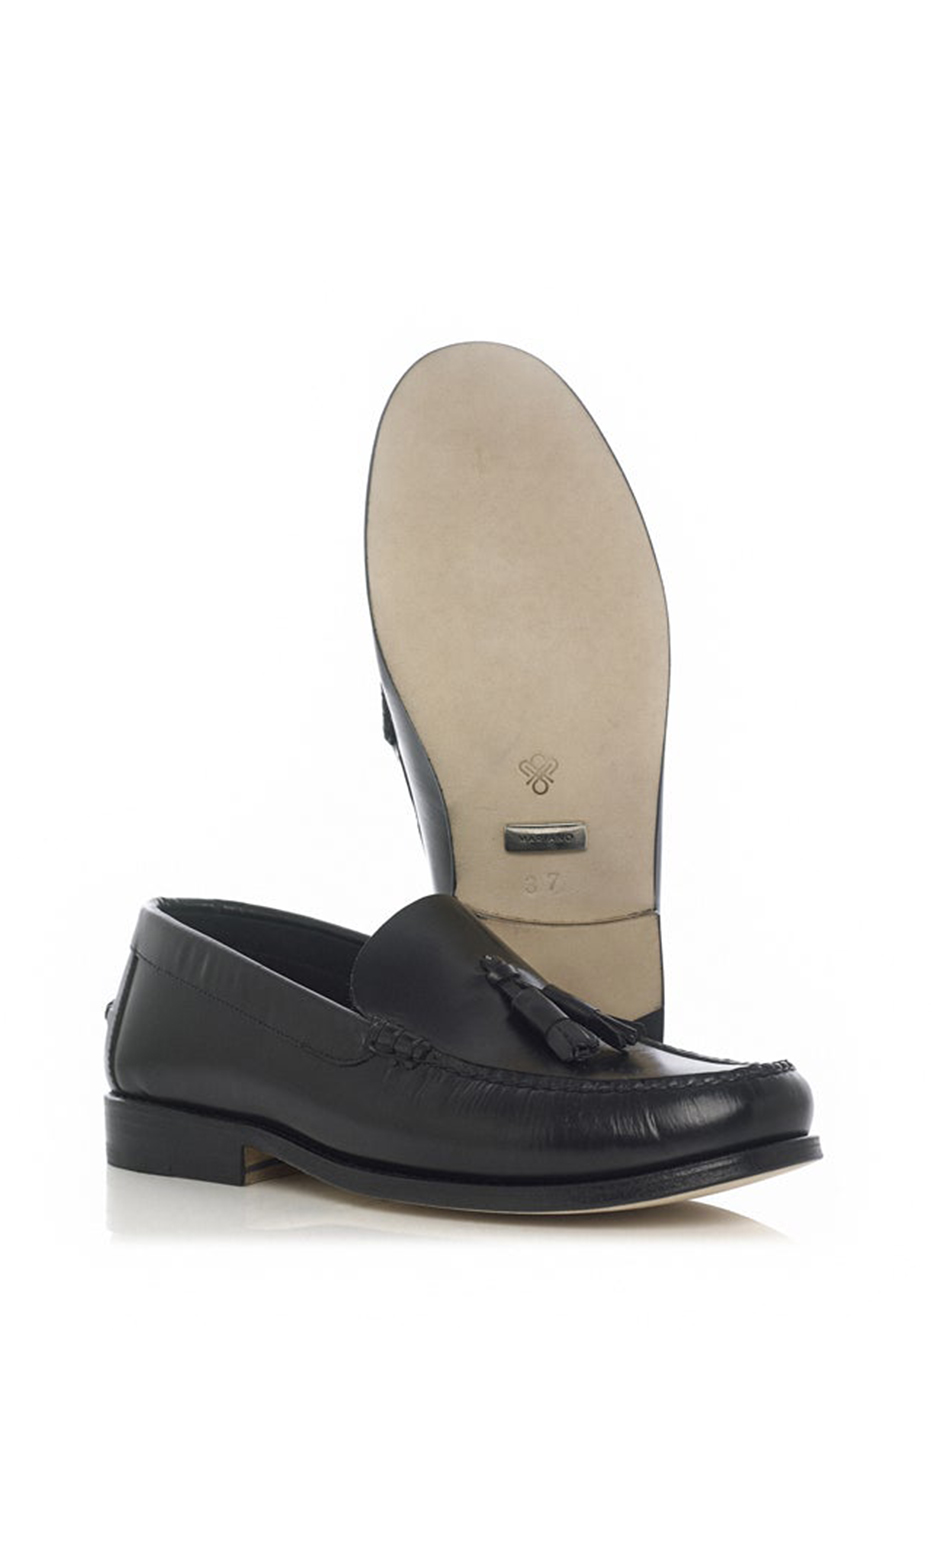 classic tassel loafers mariano